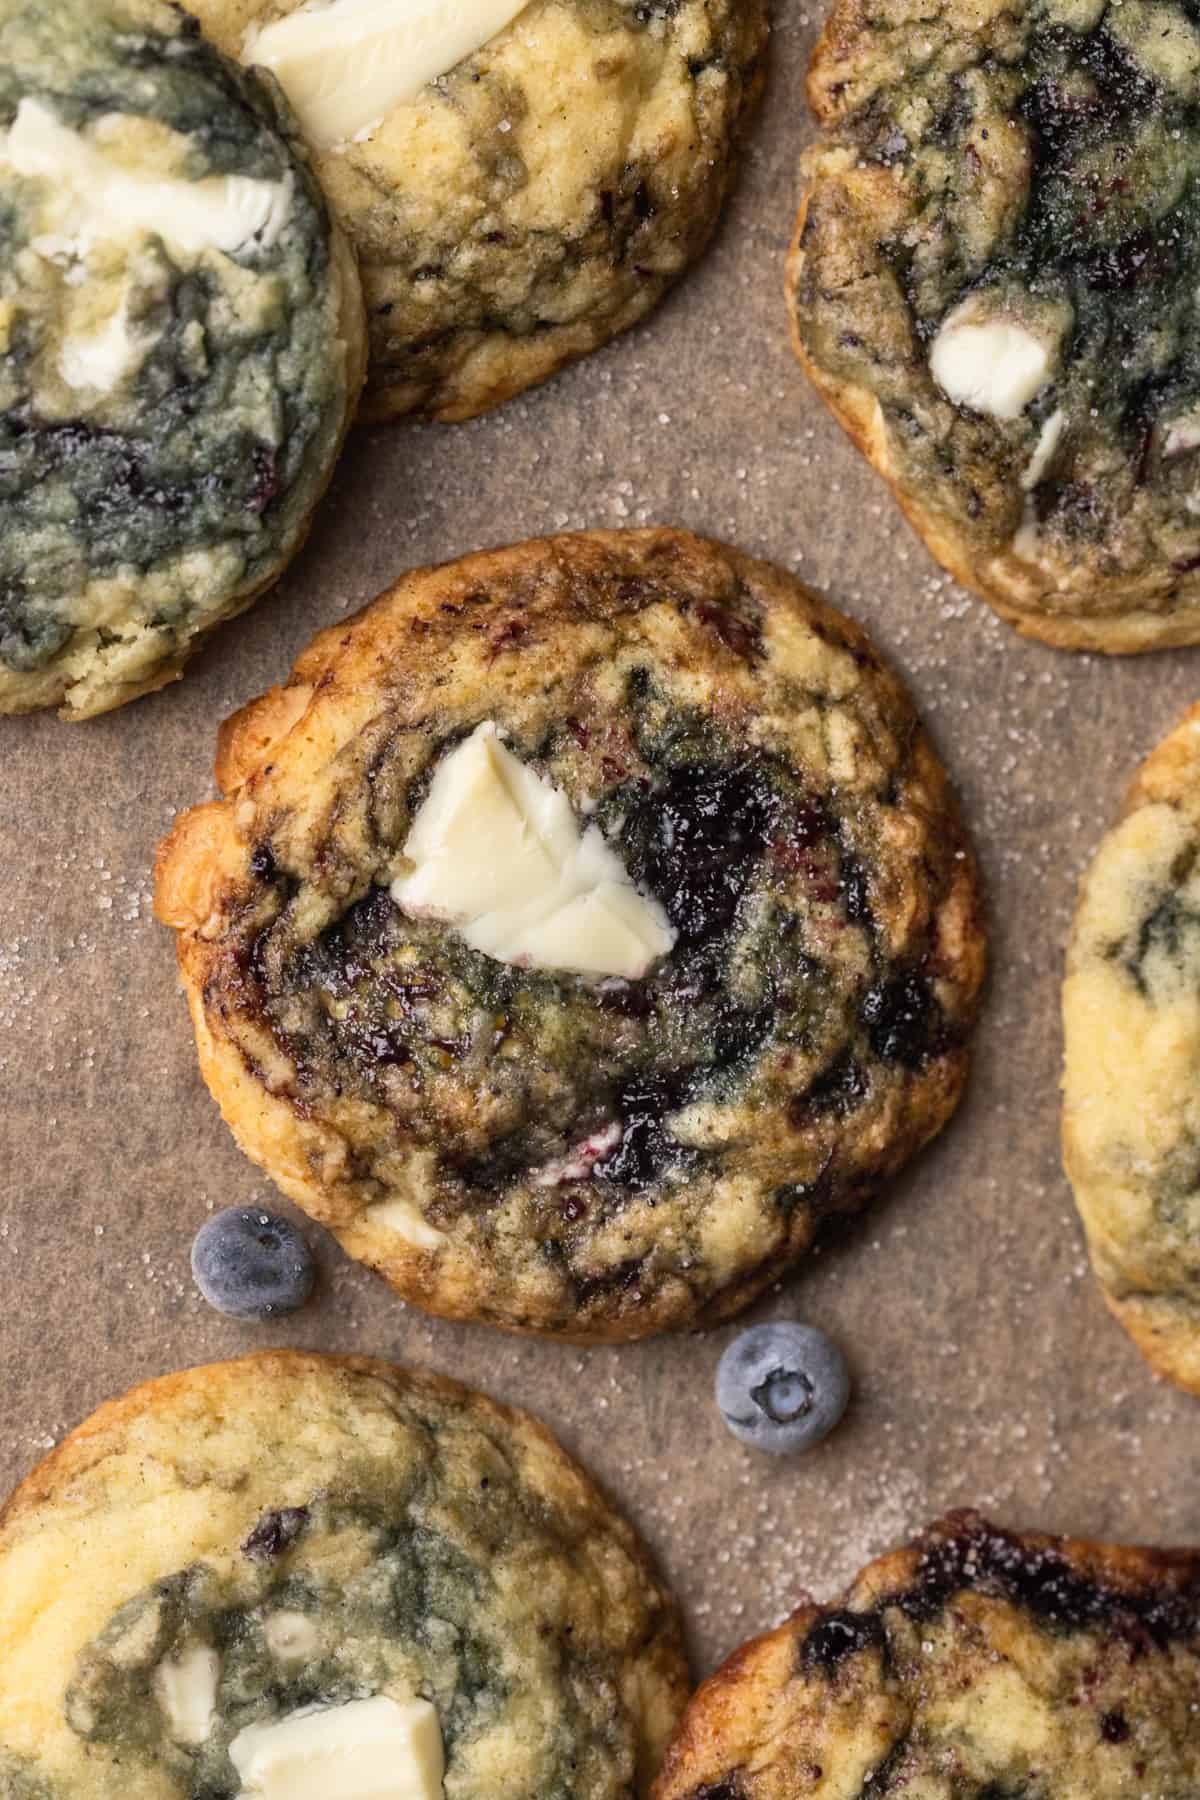 Cookies on tan parchment paper with blueberries.